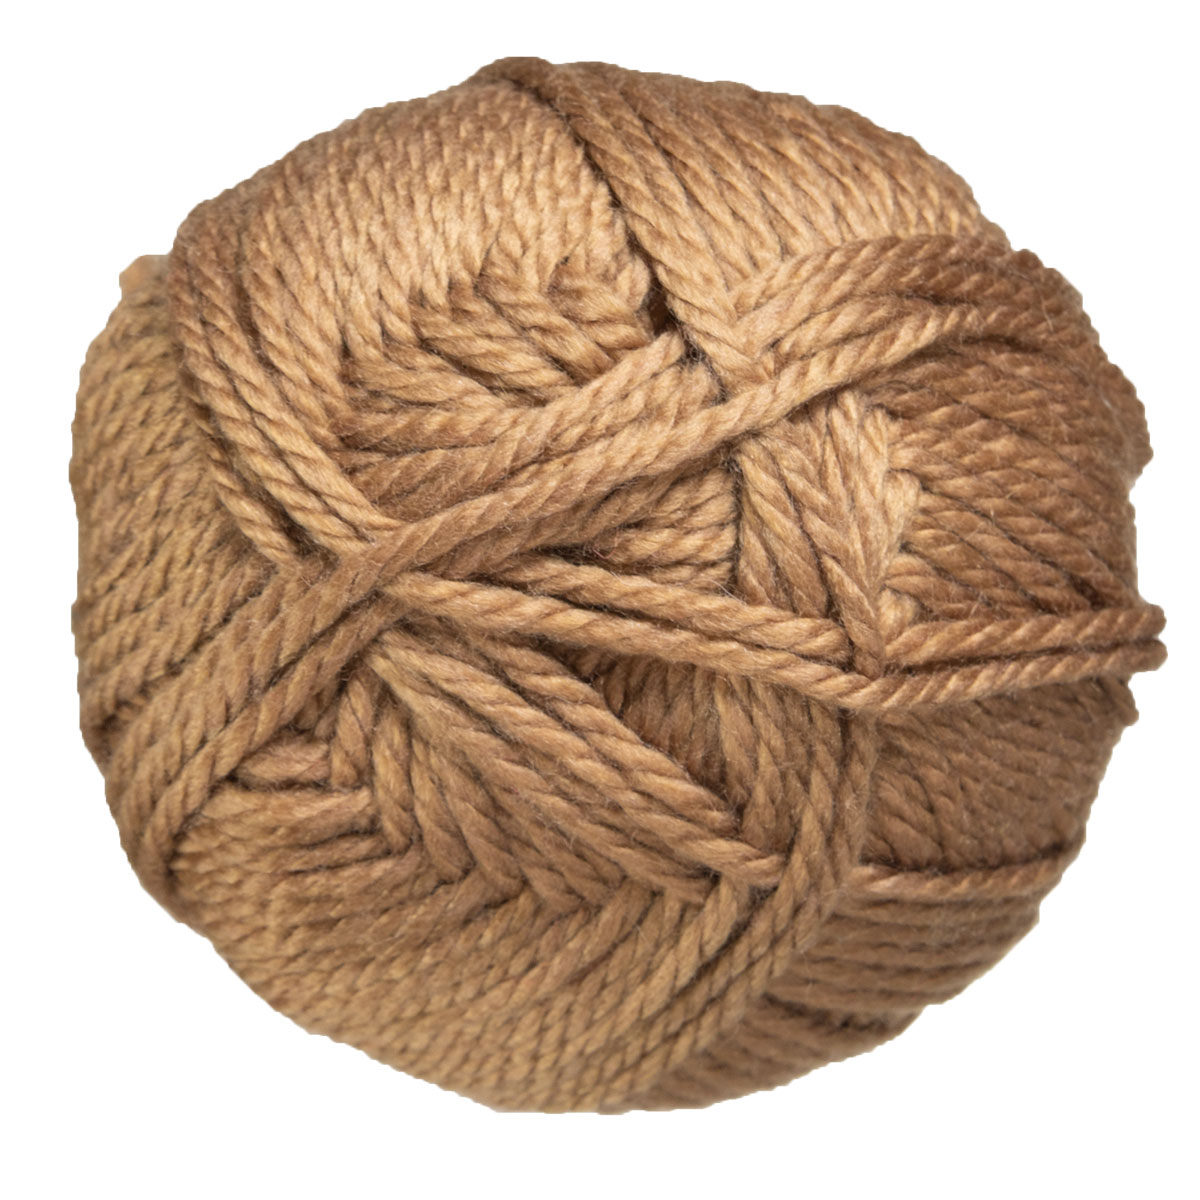 Pacific Chunky - The Yarn Patch